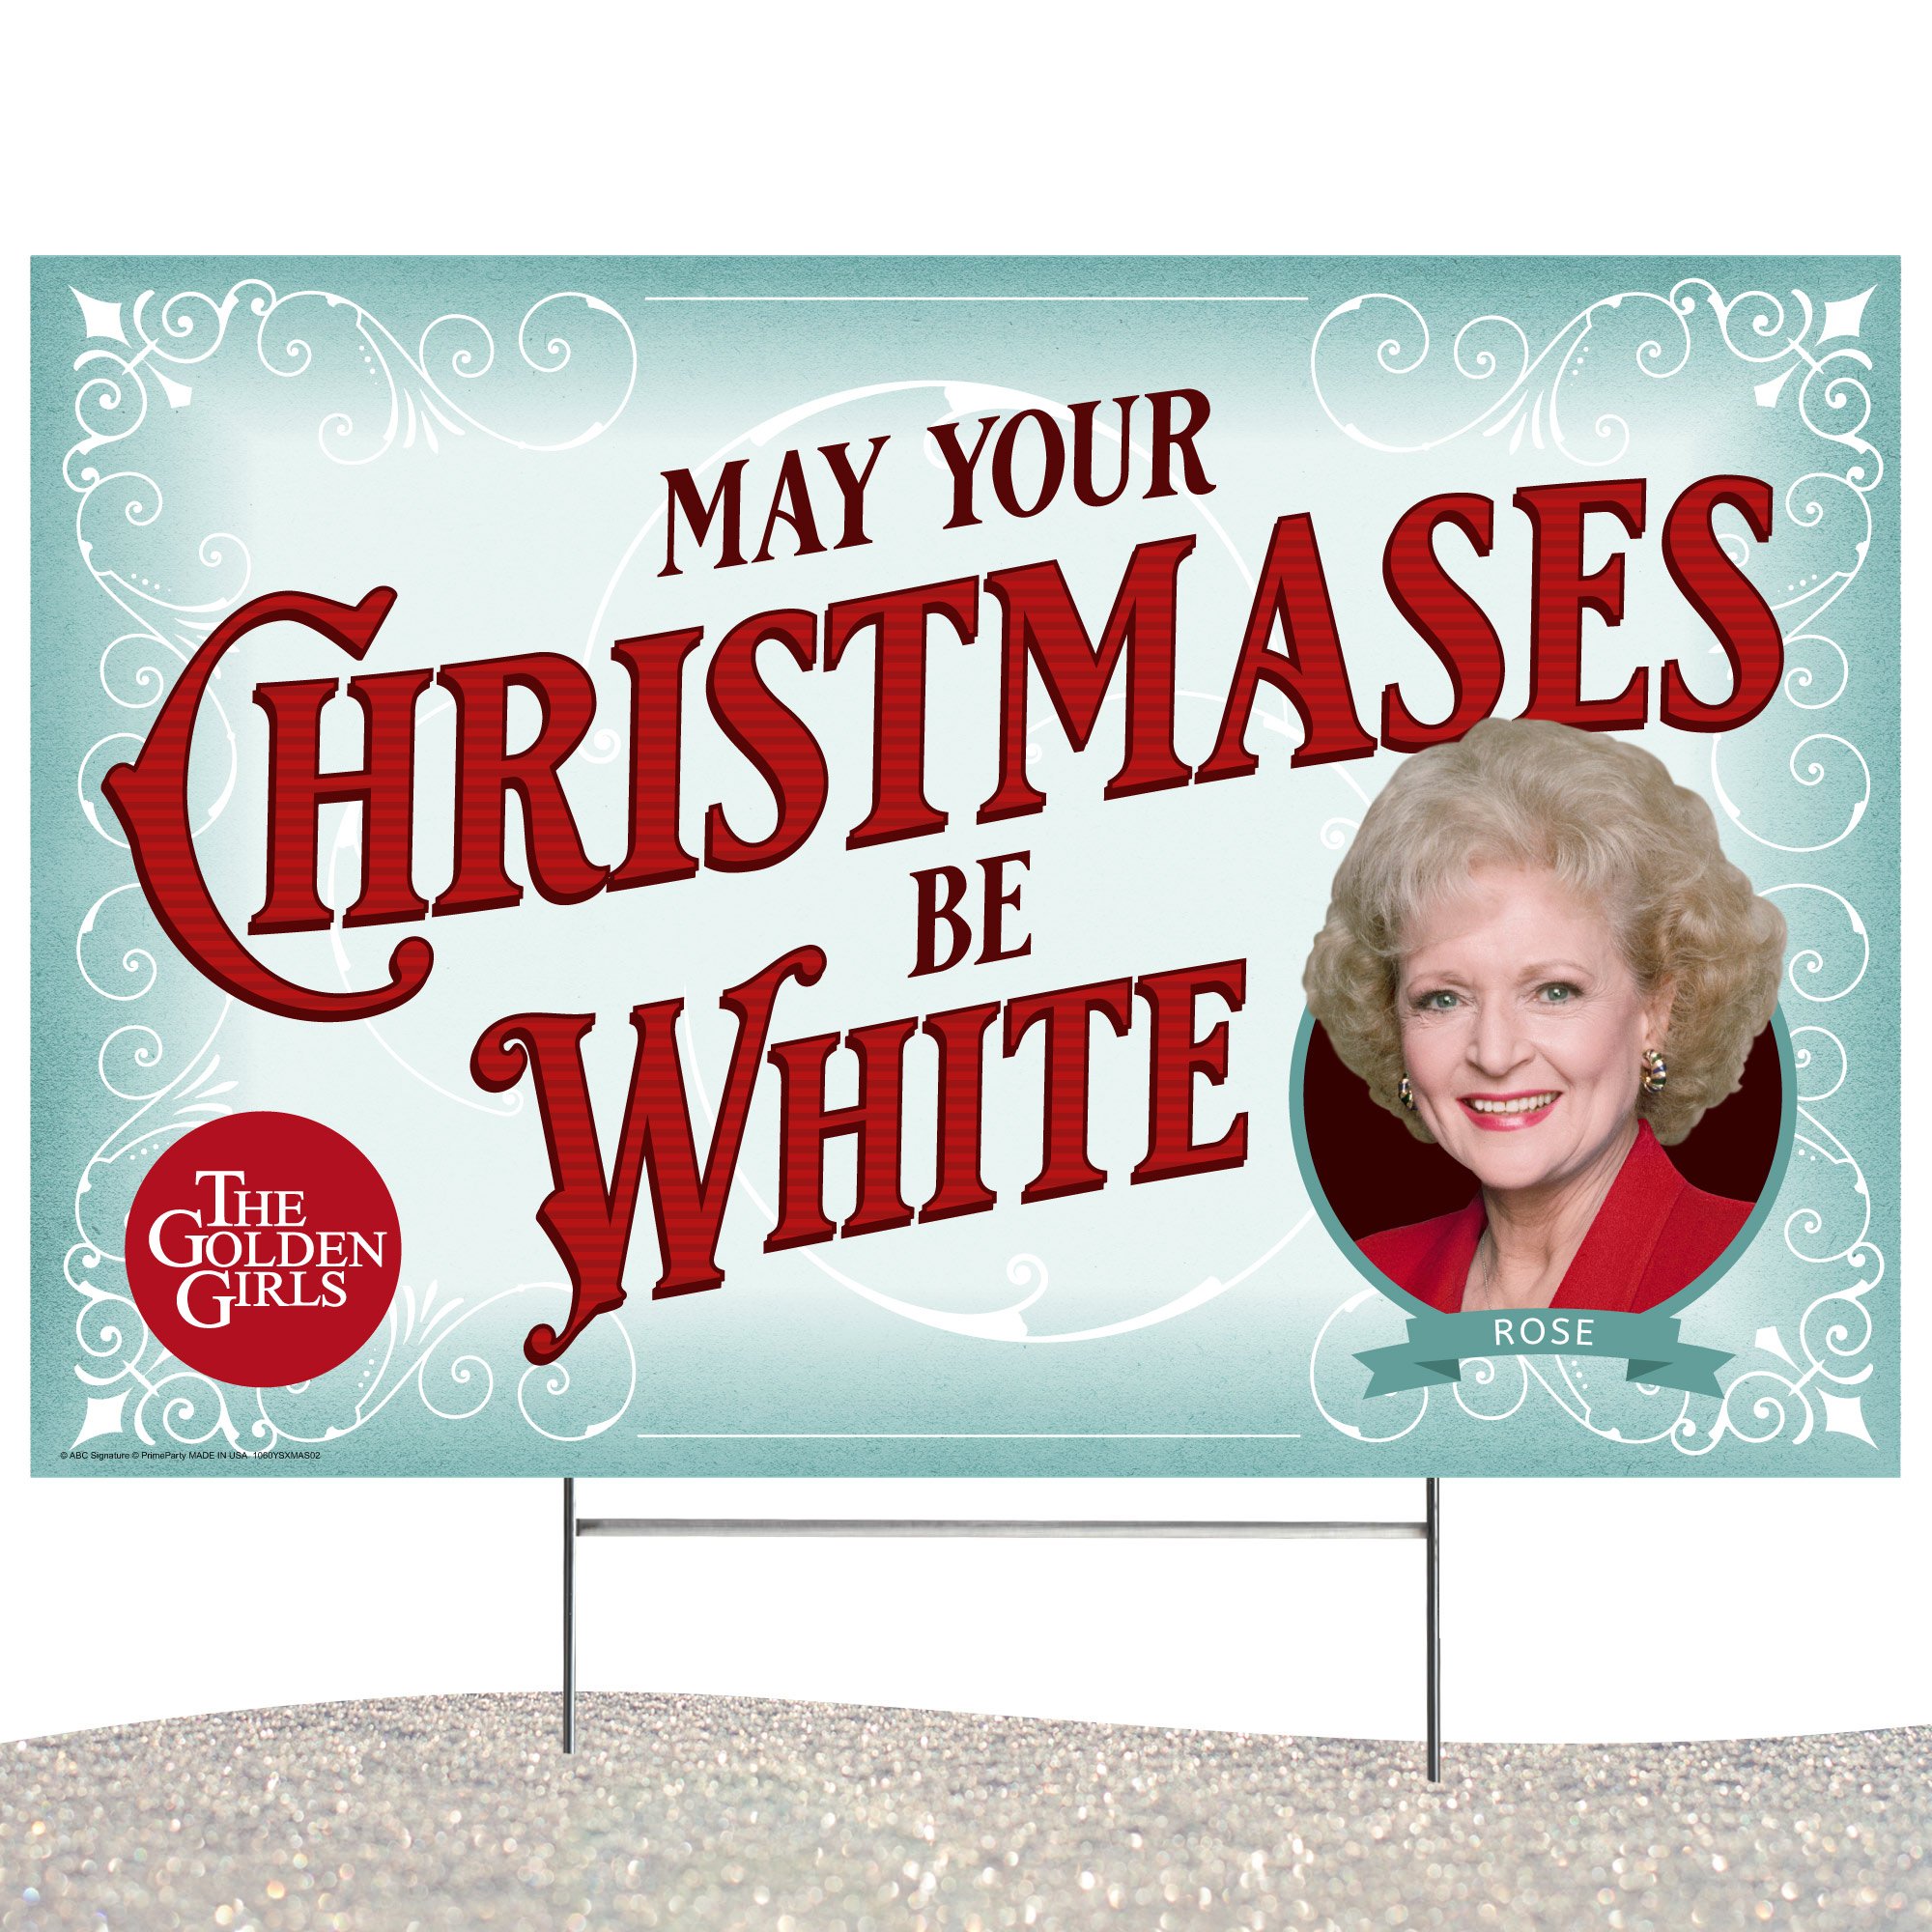 May your Christmases be White. The Golden Girls.